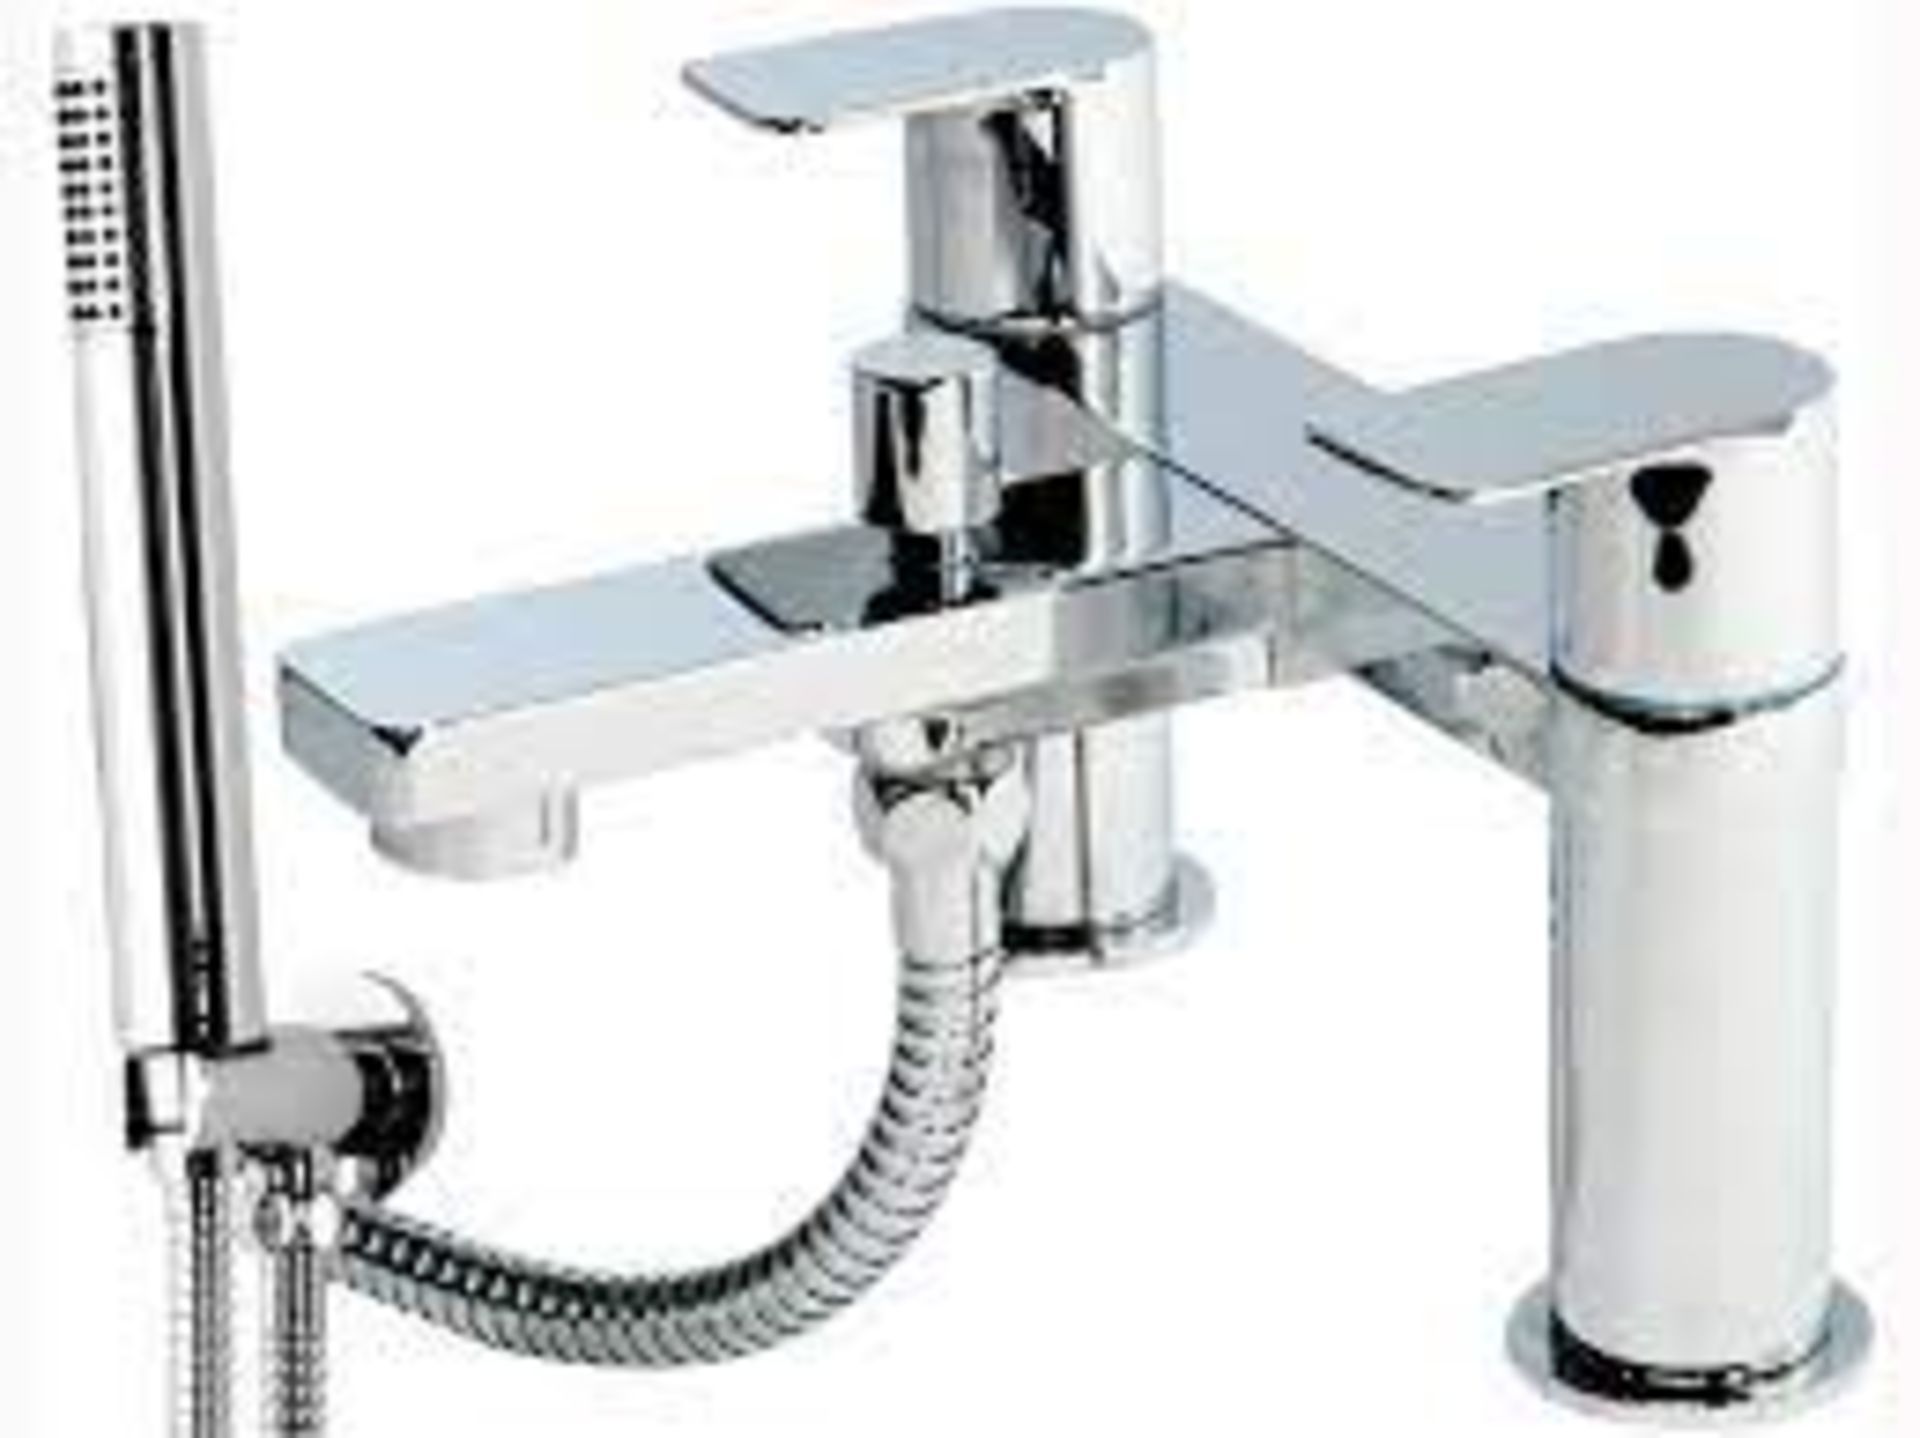 TRADE LOT 10 X BRAND NEW WIND BATH SHOWER MIXER WITH HOSE AND HANDSET RRP £179 PW